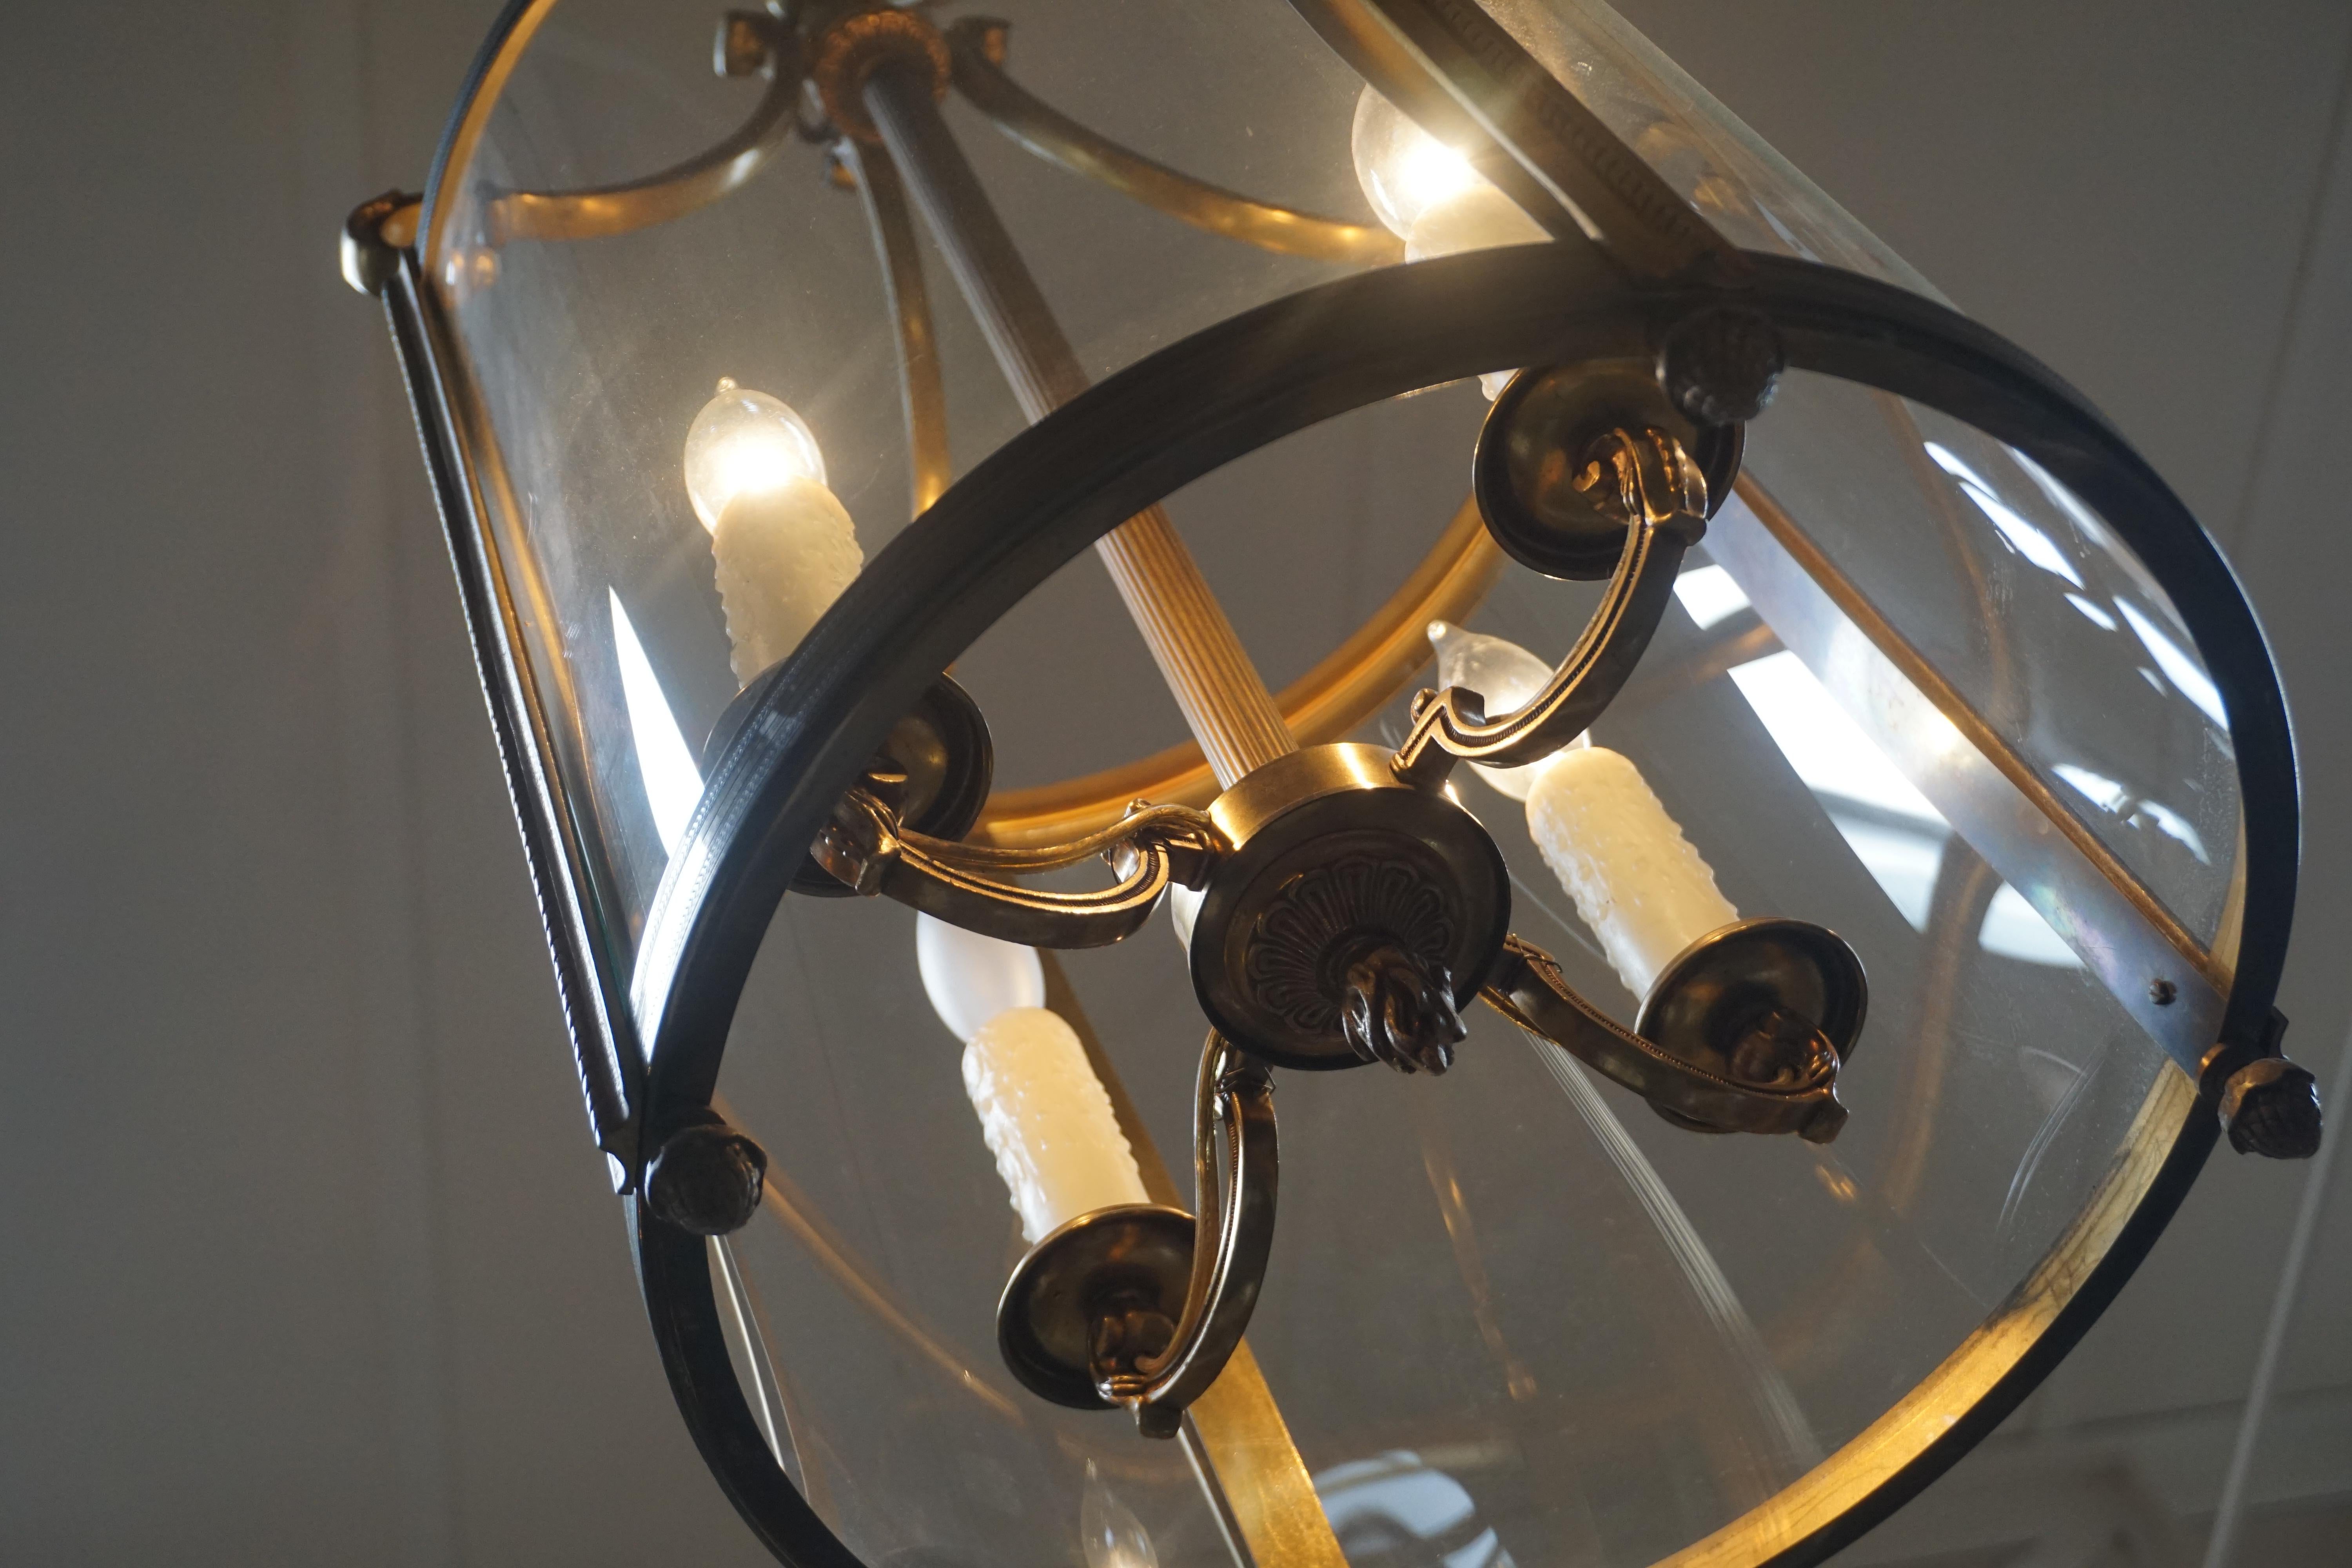 Louis XVI style hanging brass lantern light fixture. Four serpentine arms attach below the double reverse scroll fixture loop from which the reeded tube of the four light chandelier is suspended. Each faux candle light rests in a simple round cup